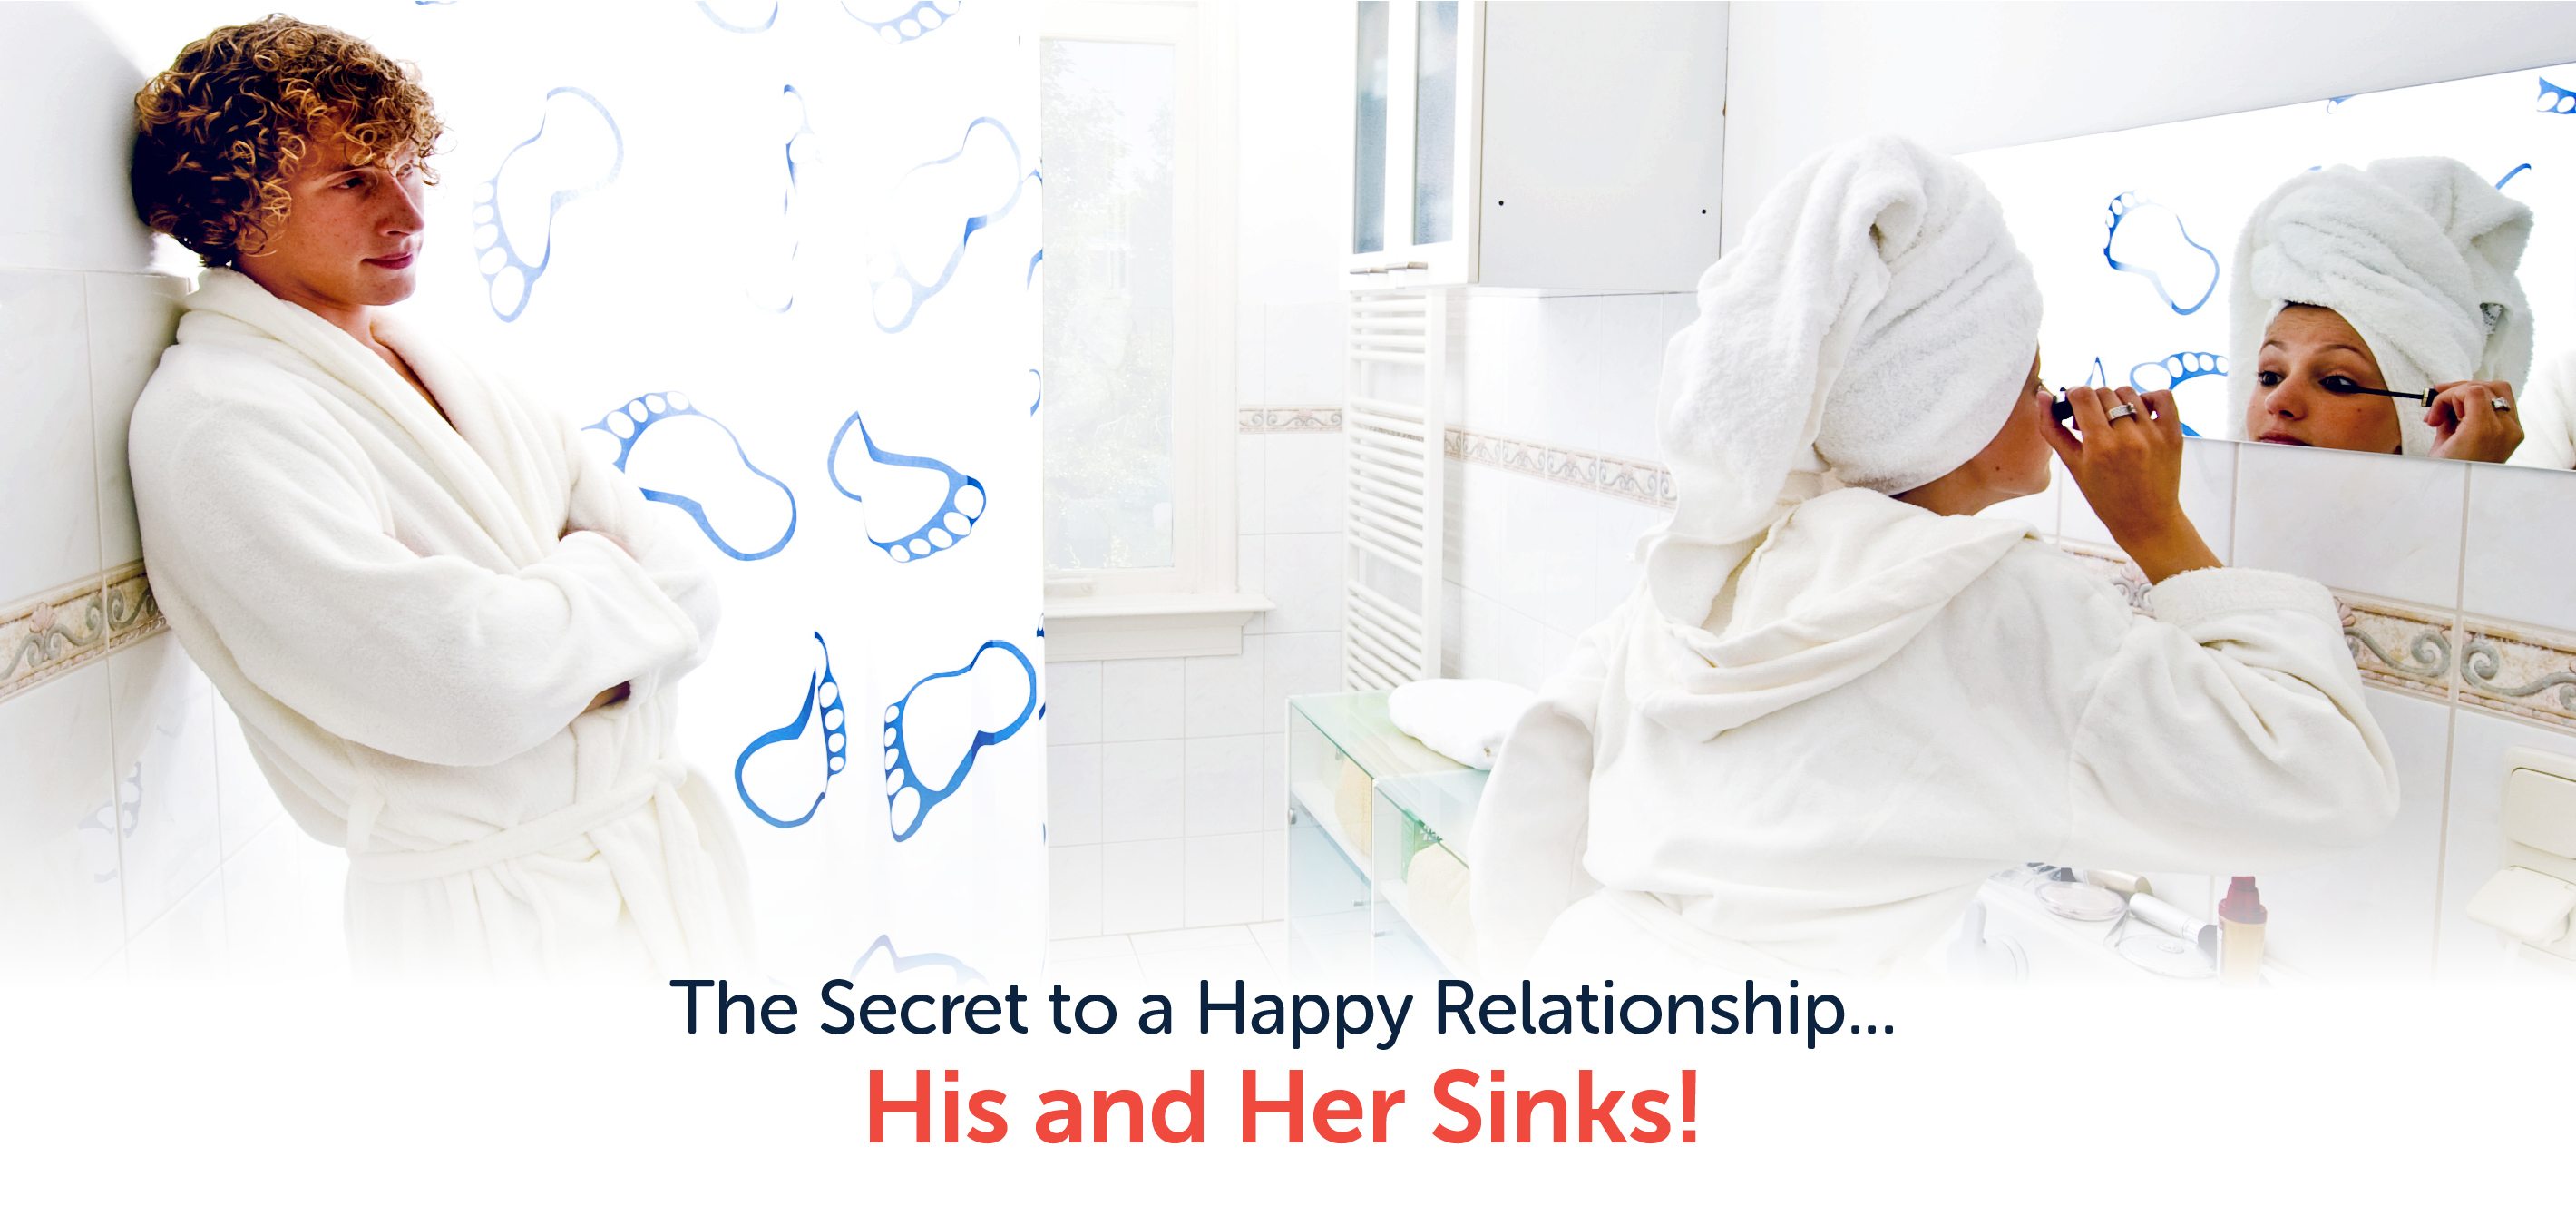 The secret to a happy relationship... his and her sinks!